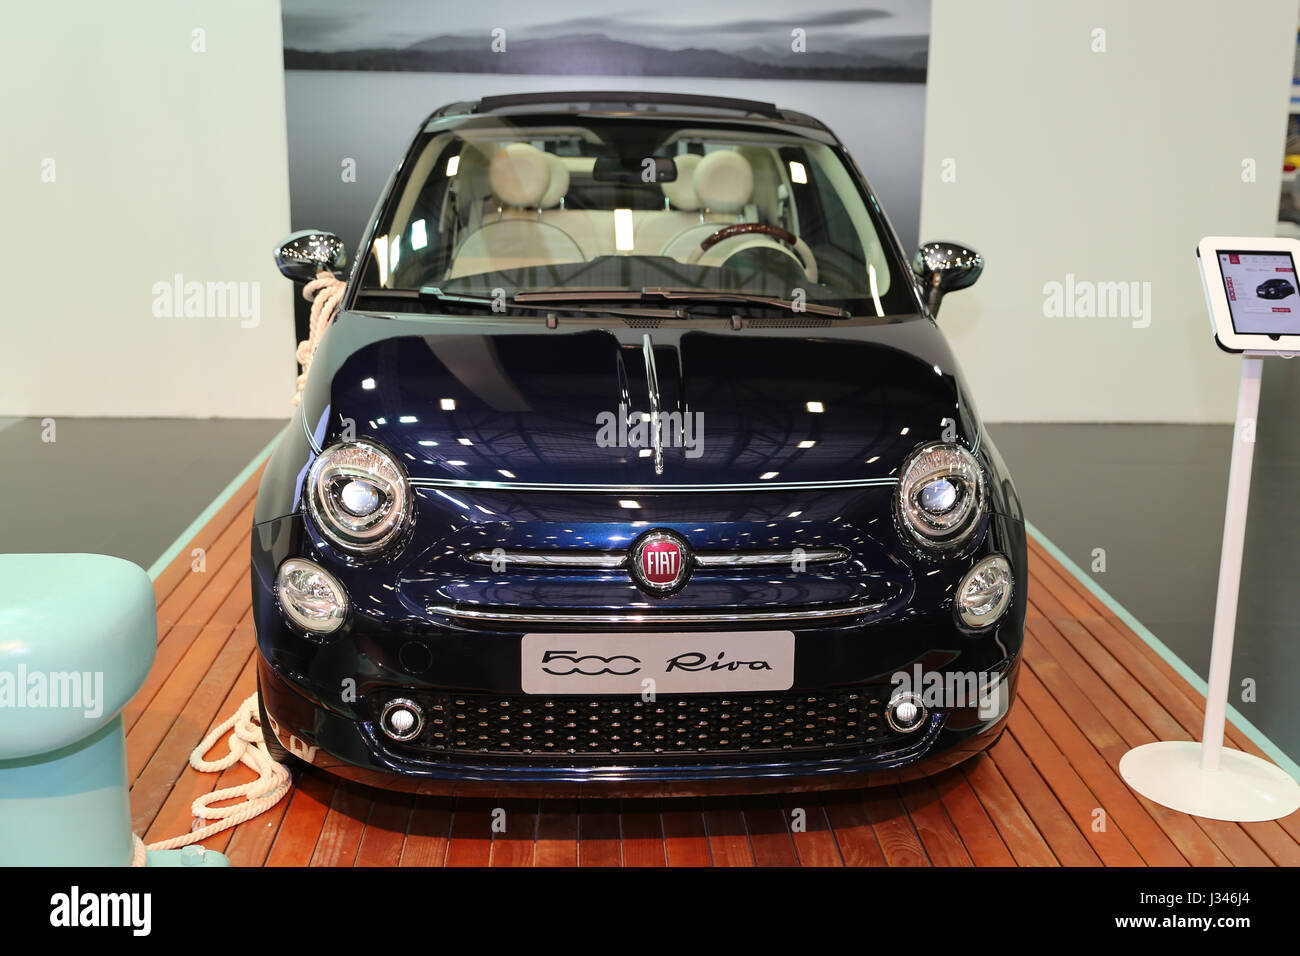 Fiat 500 Riva High Resolution Stock Photography And Images Alamy